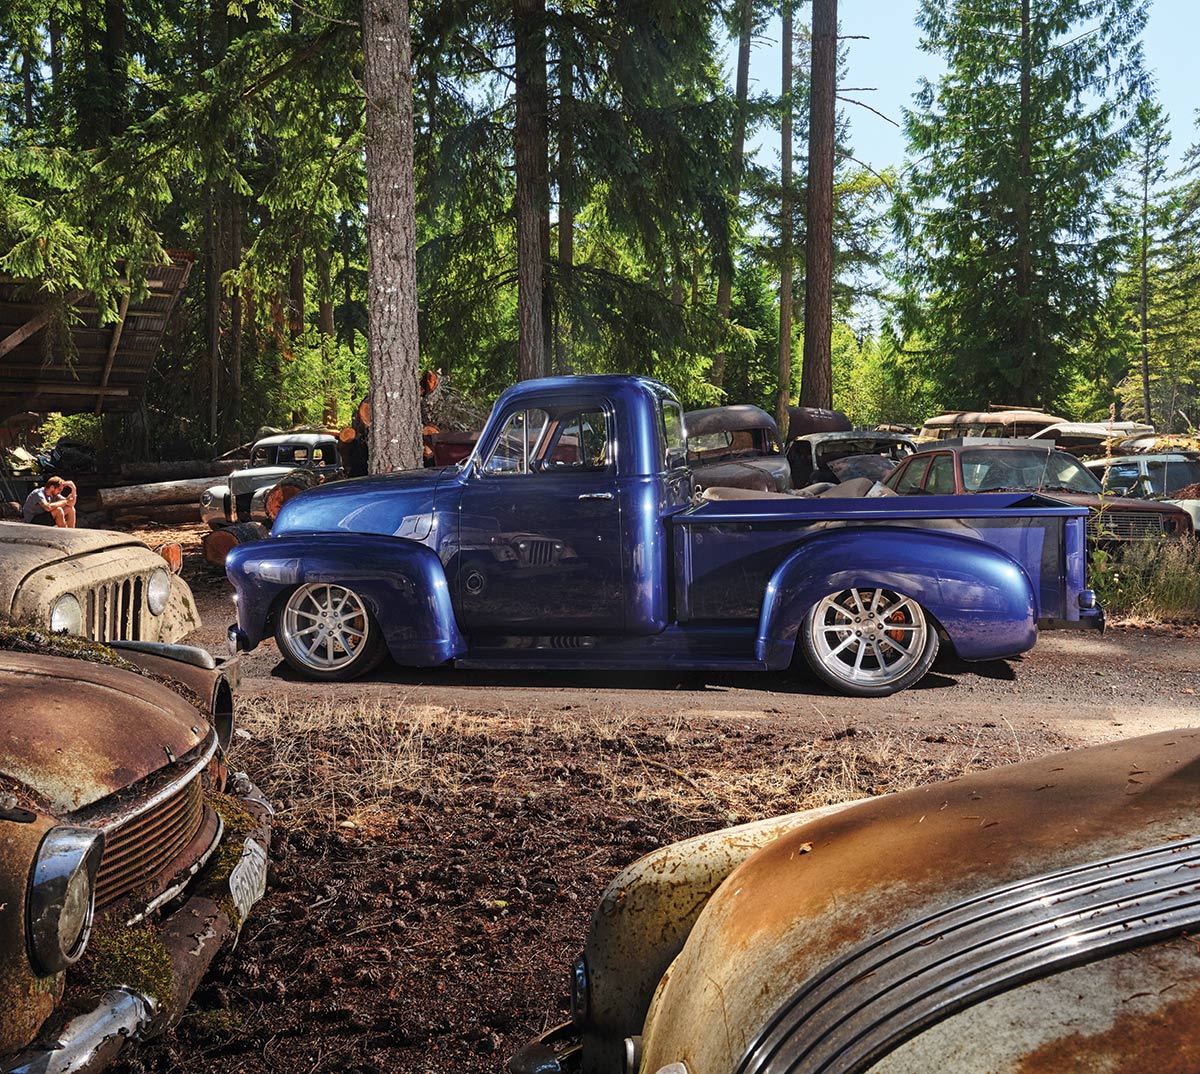 '54 Chevy 3100 side profile in the woods